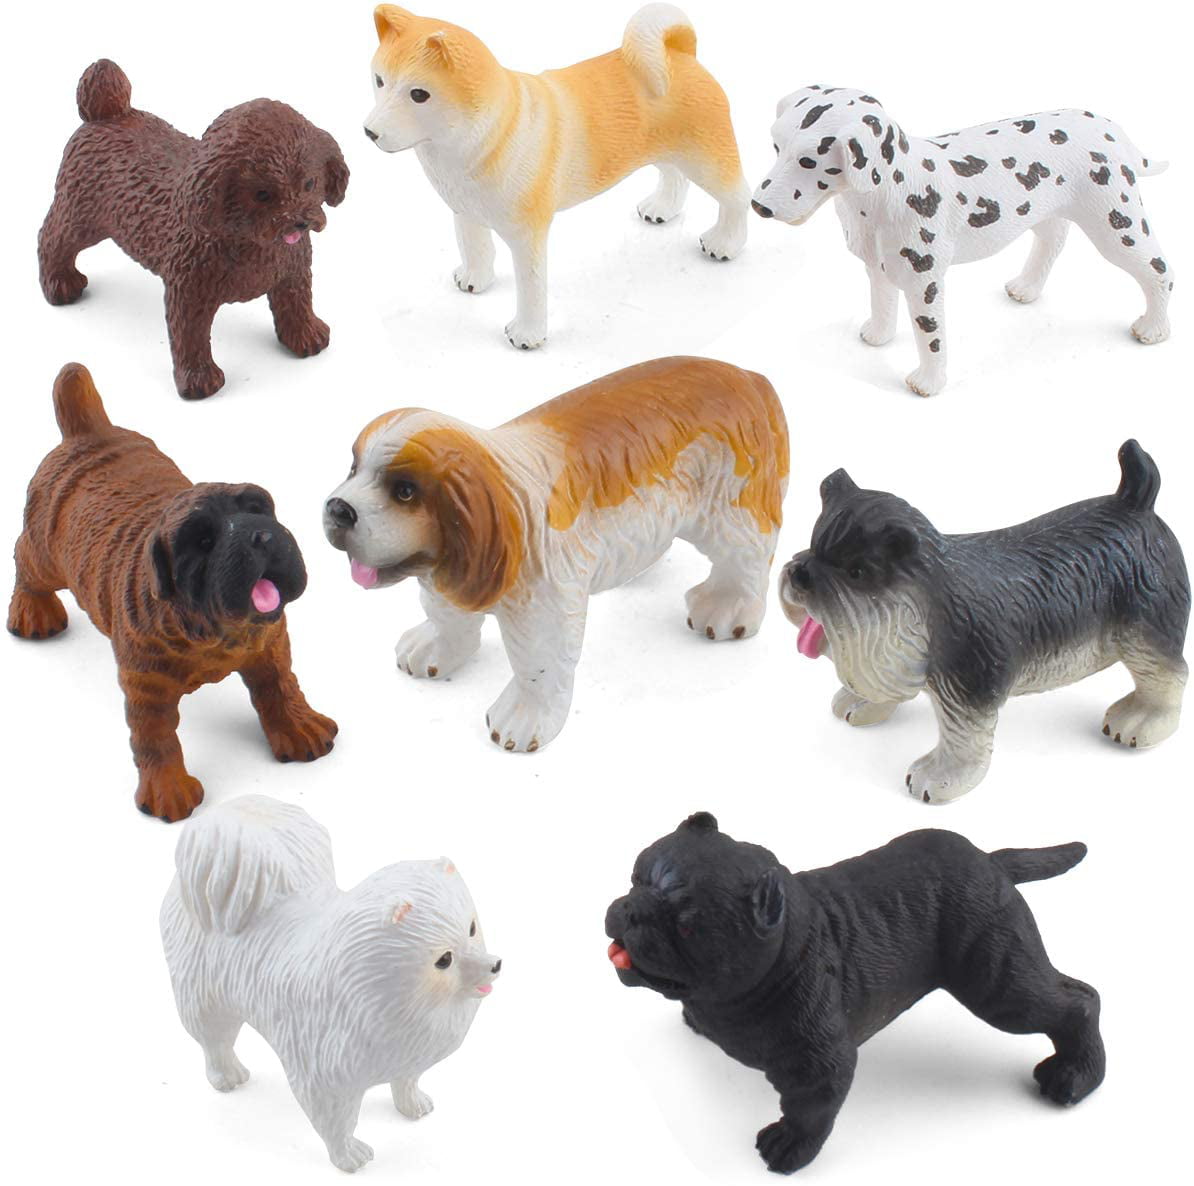 Dog's Lovers Deluxe 12 Count Dog Figurine Collection in All Colors and Dog Kind 